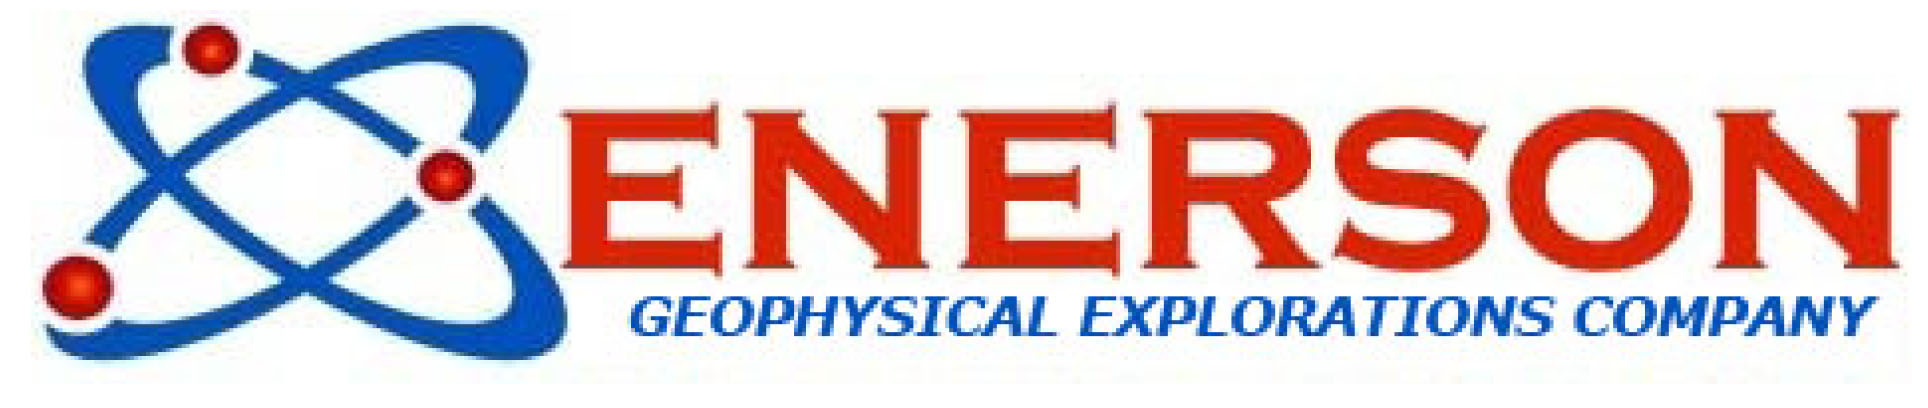 Enerson Engineering & Geophysical Explorations